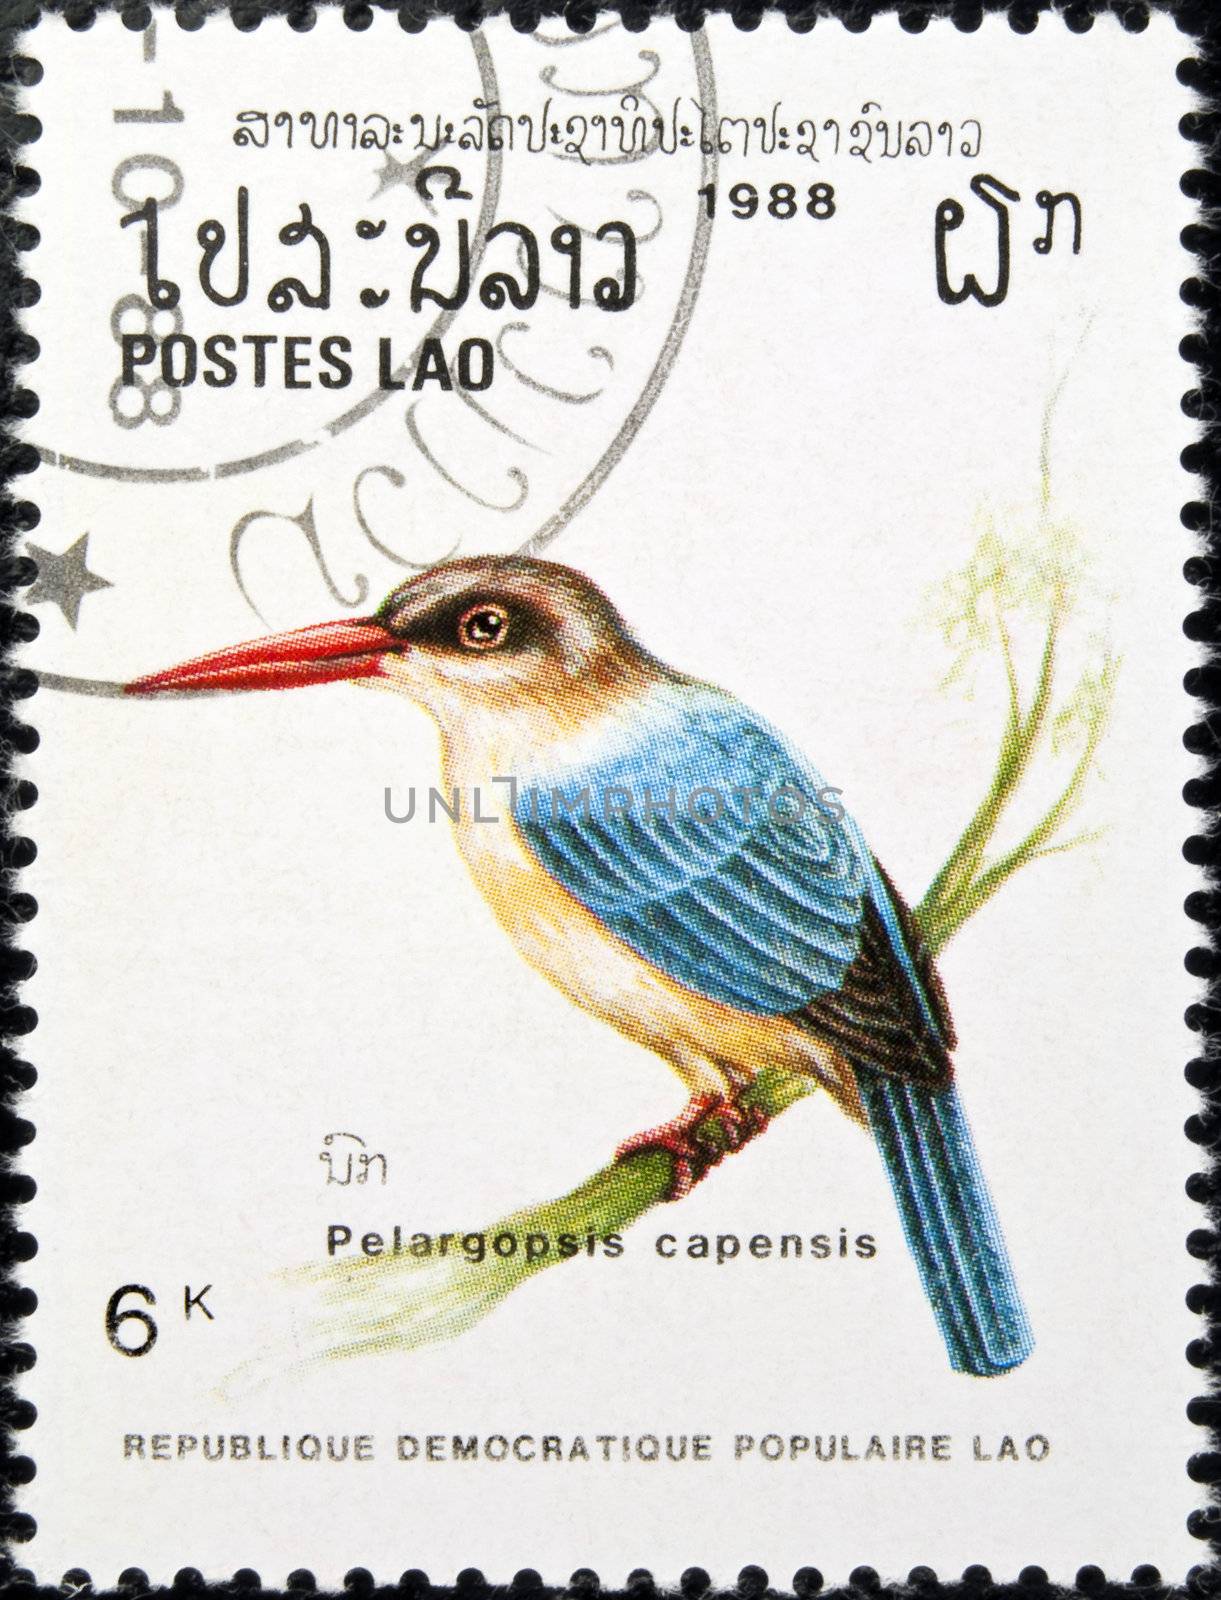 LAOS - circa 1988:stamp features a Stork-billed kingfisher bird (pelargopsis capensis), circa 1988 in the Lao People's Democratic Republic.